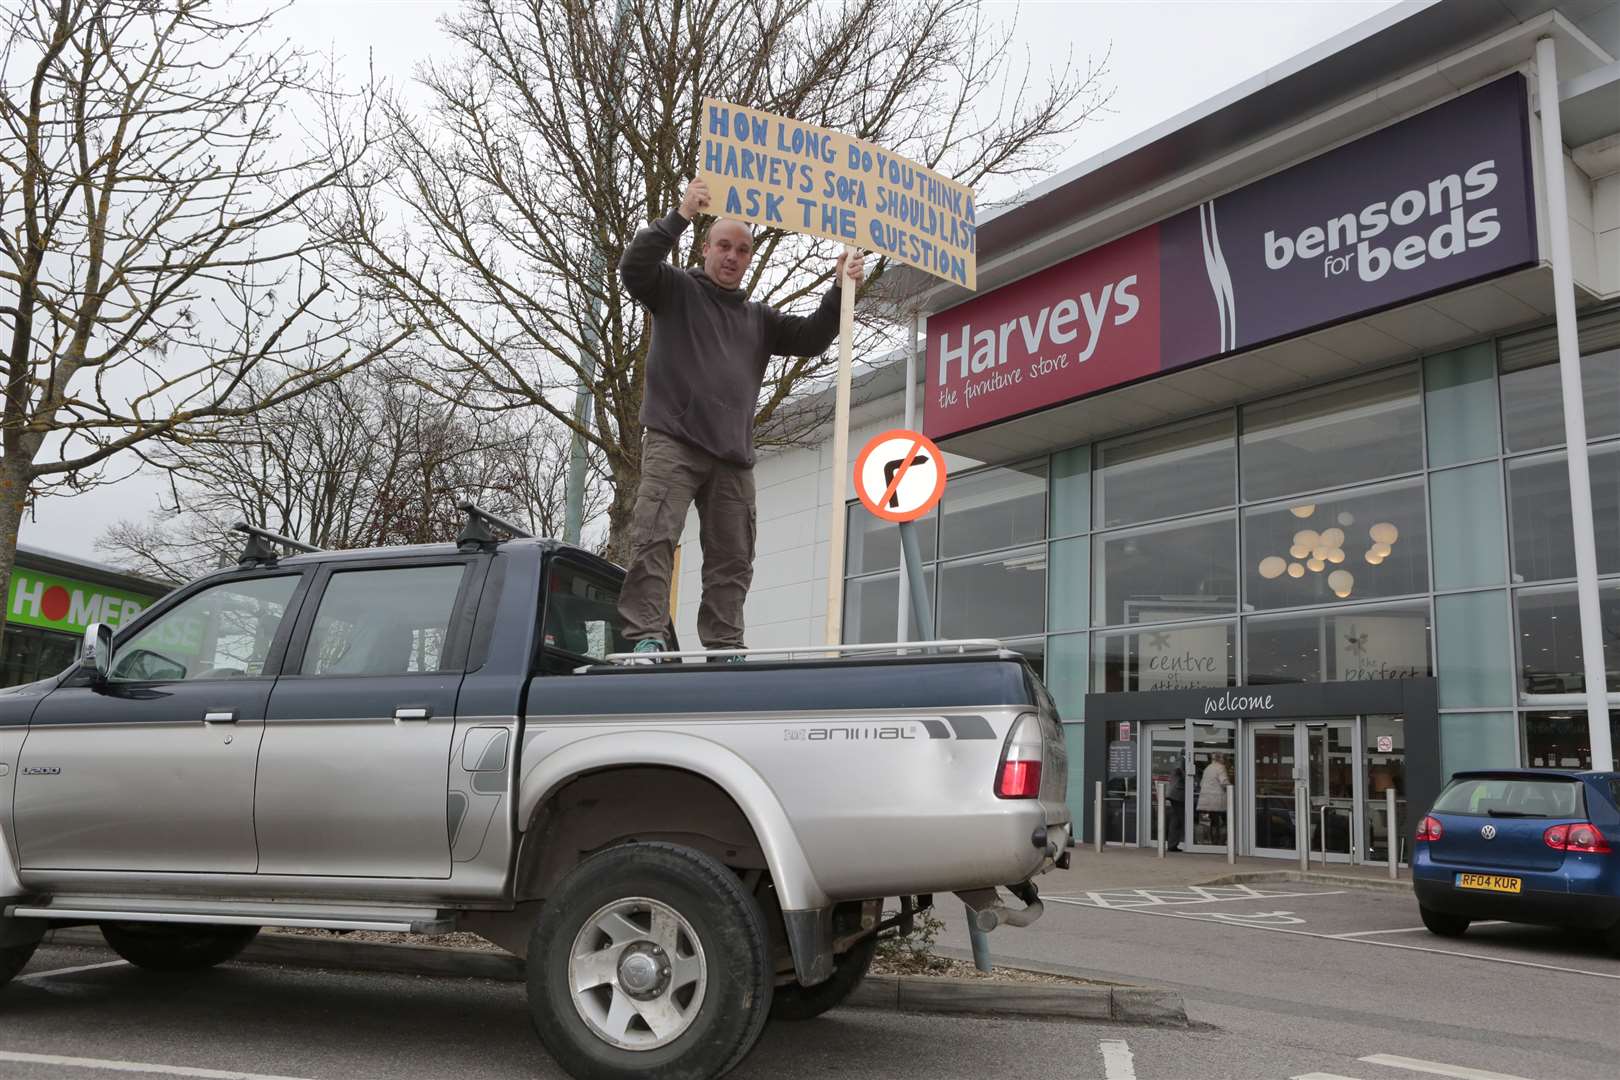 Ian Hayden, from Paddock Wood, staged a protest outside Harveys in Aylesford retail park. Picture by Martin Apps.